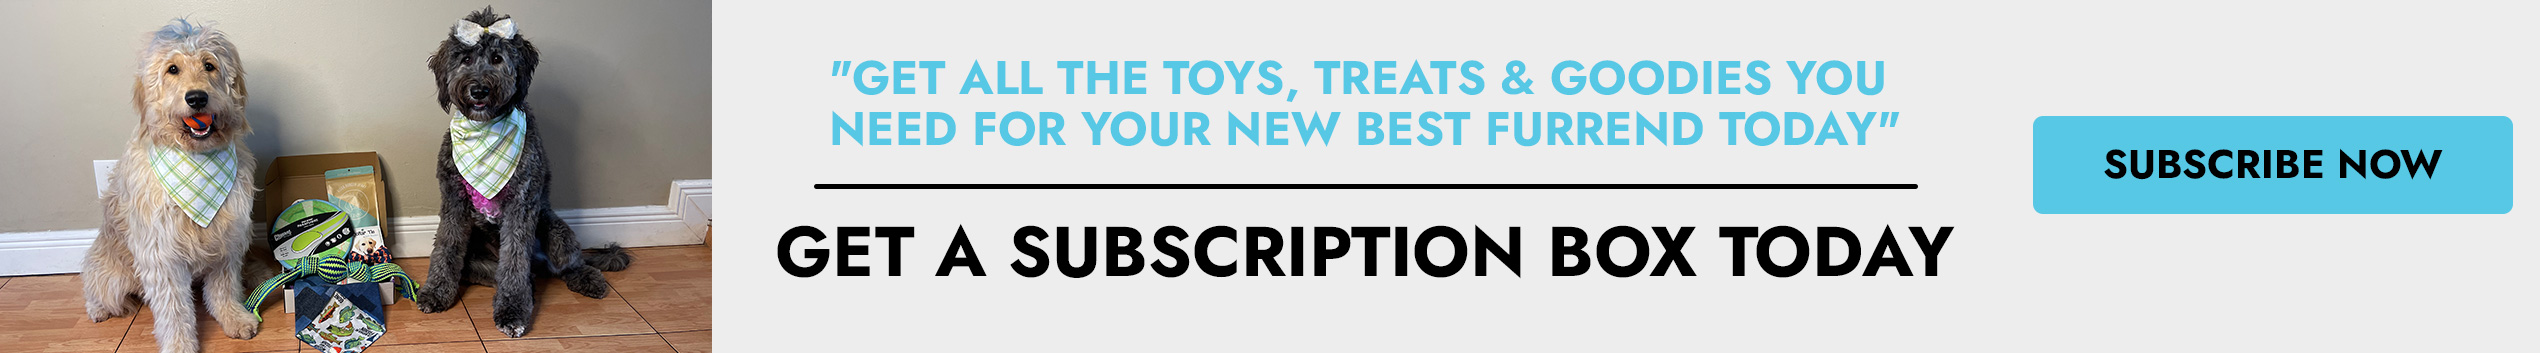 Puppy Subscription Box - All Tails Wag